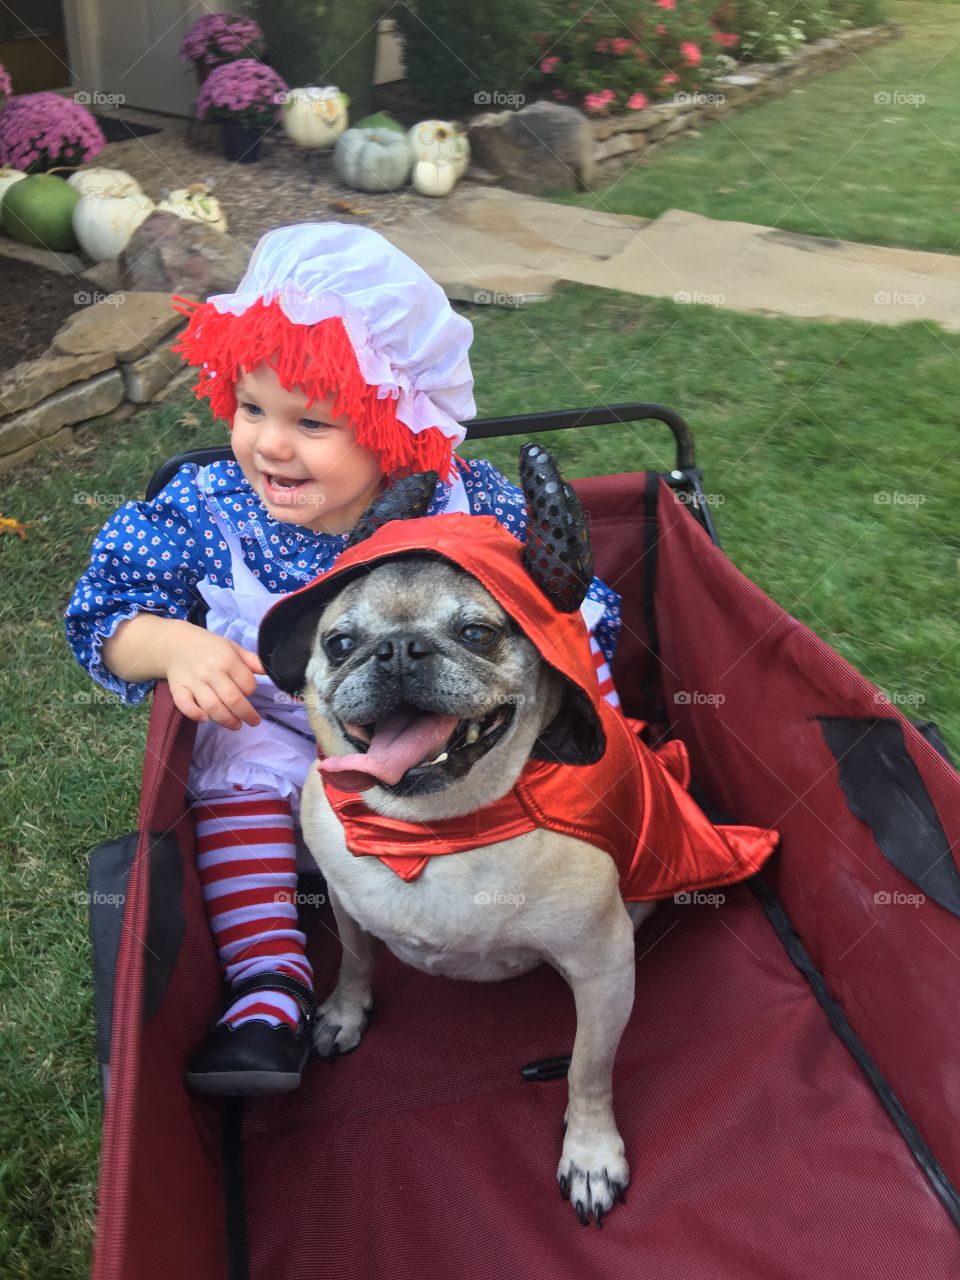 Off to a Halloween party with Raggedy Ann and her little devil dog